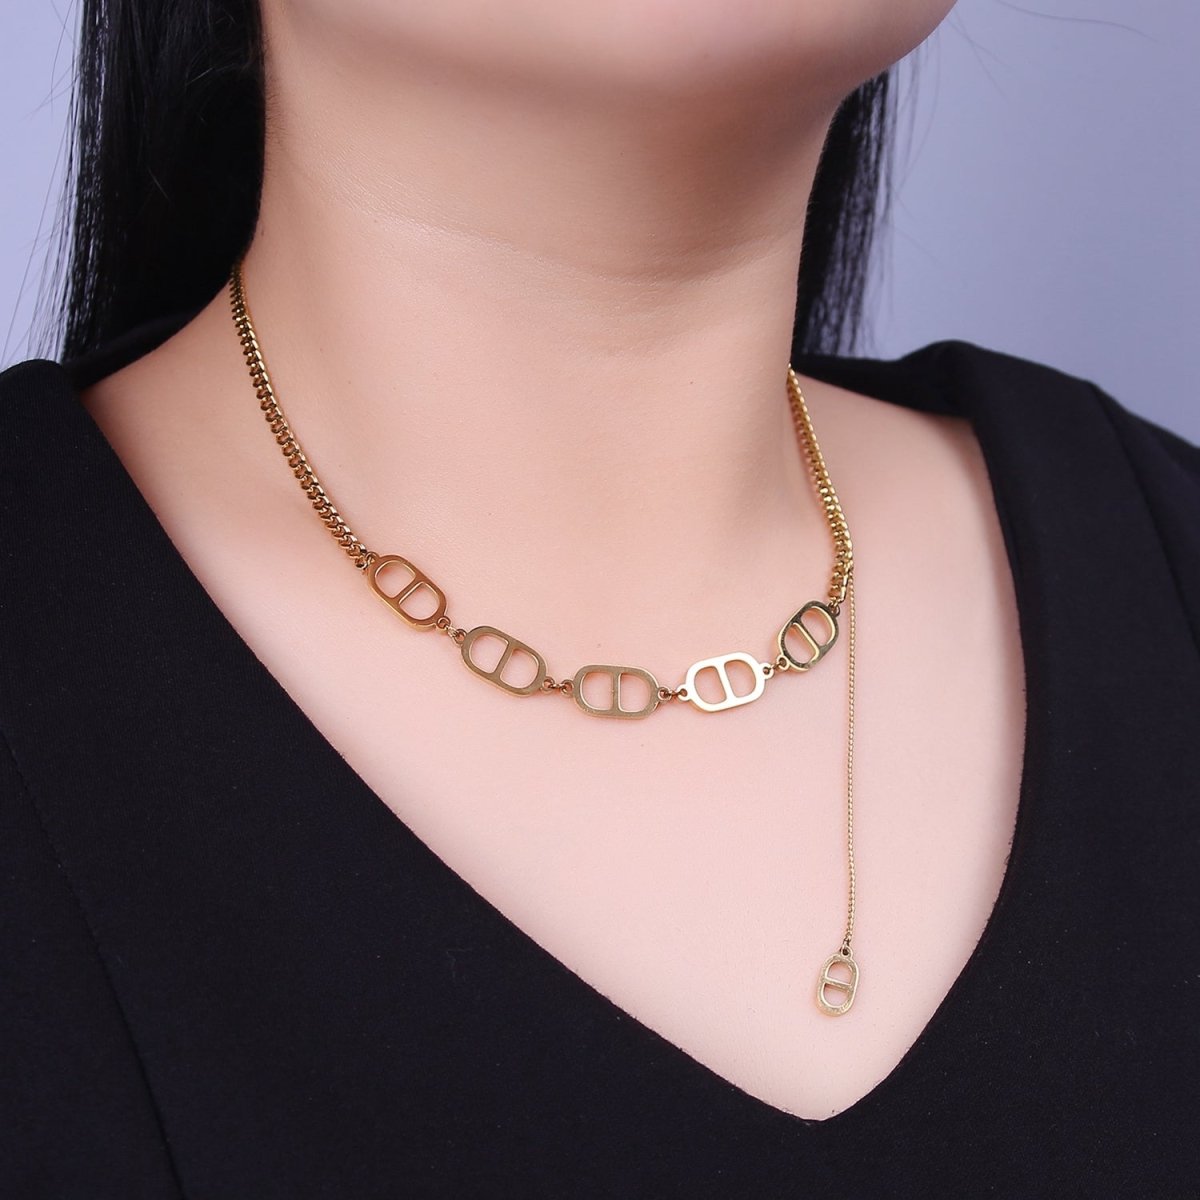 Statement Gold Mariner Anchor Necklace Chain 3.6mm thickness Curb Chain for Statement Necklace | WA-915 Clearance Pricing - DLUXCA